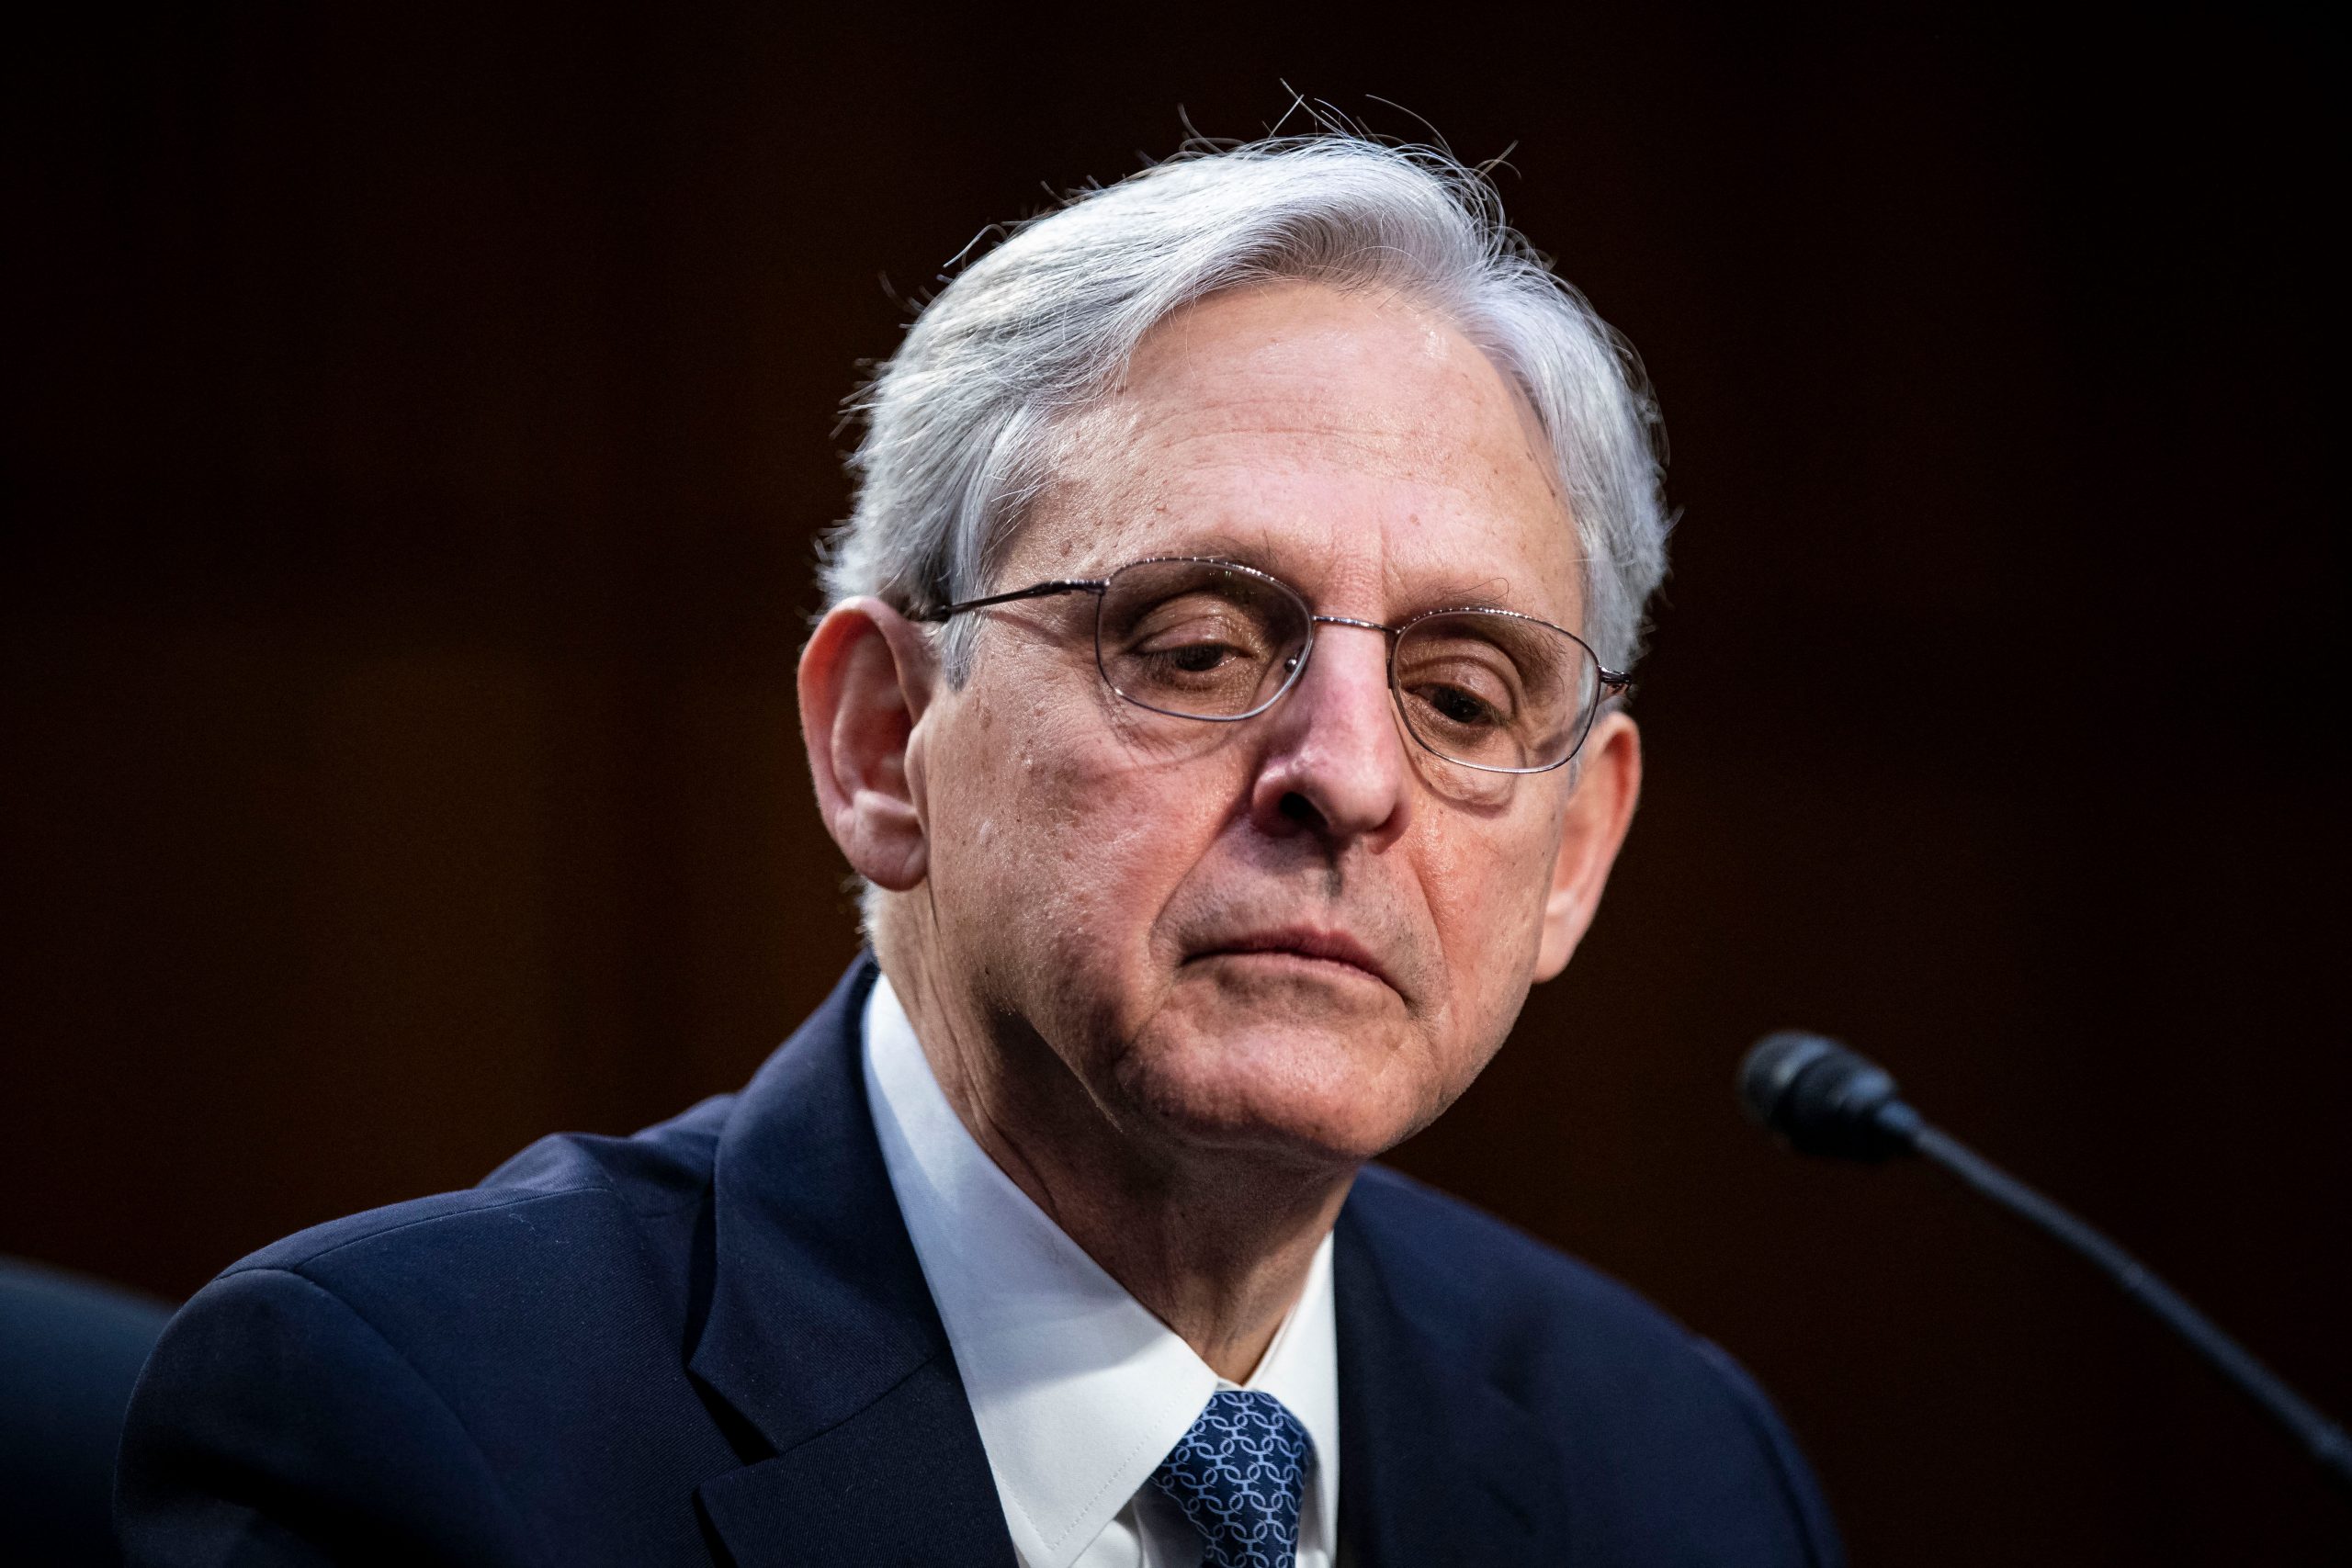 Senate committee votes for full confirmation of Merrick Garland as Attorney General